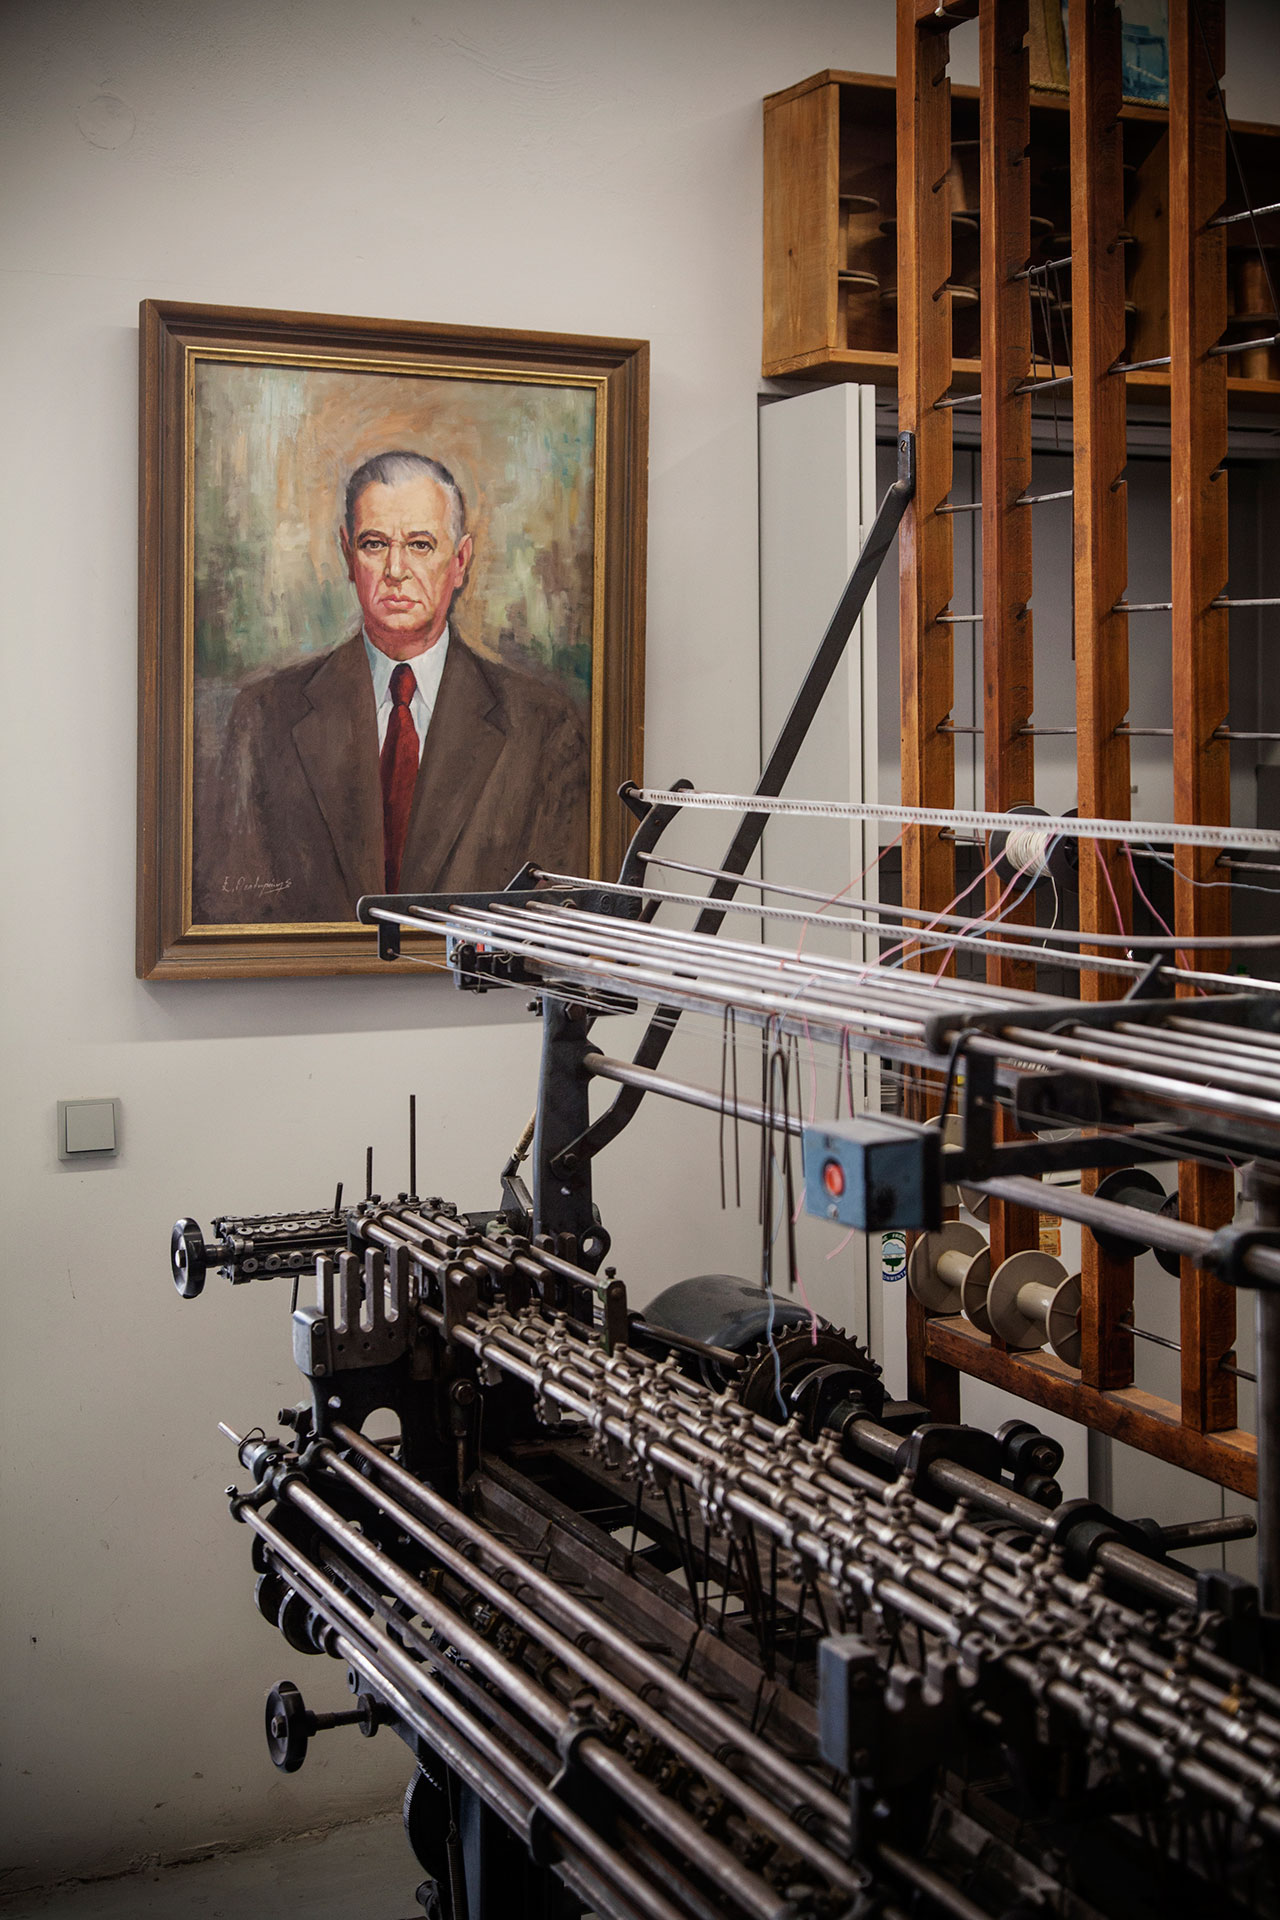 Athens. The Mentis ribbon weaving company. In the background a portrait of one of the former owners. © Benjamin Tafel.